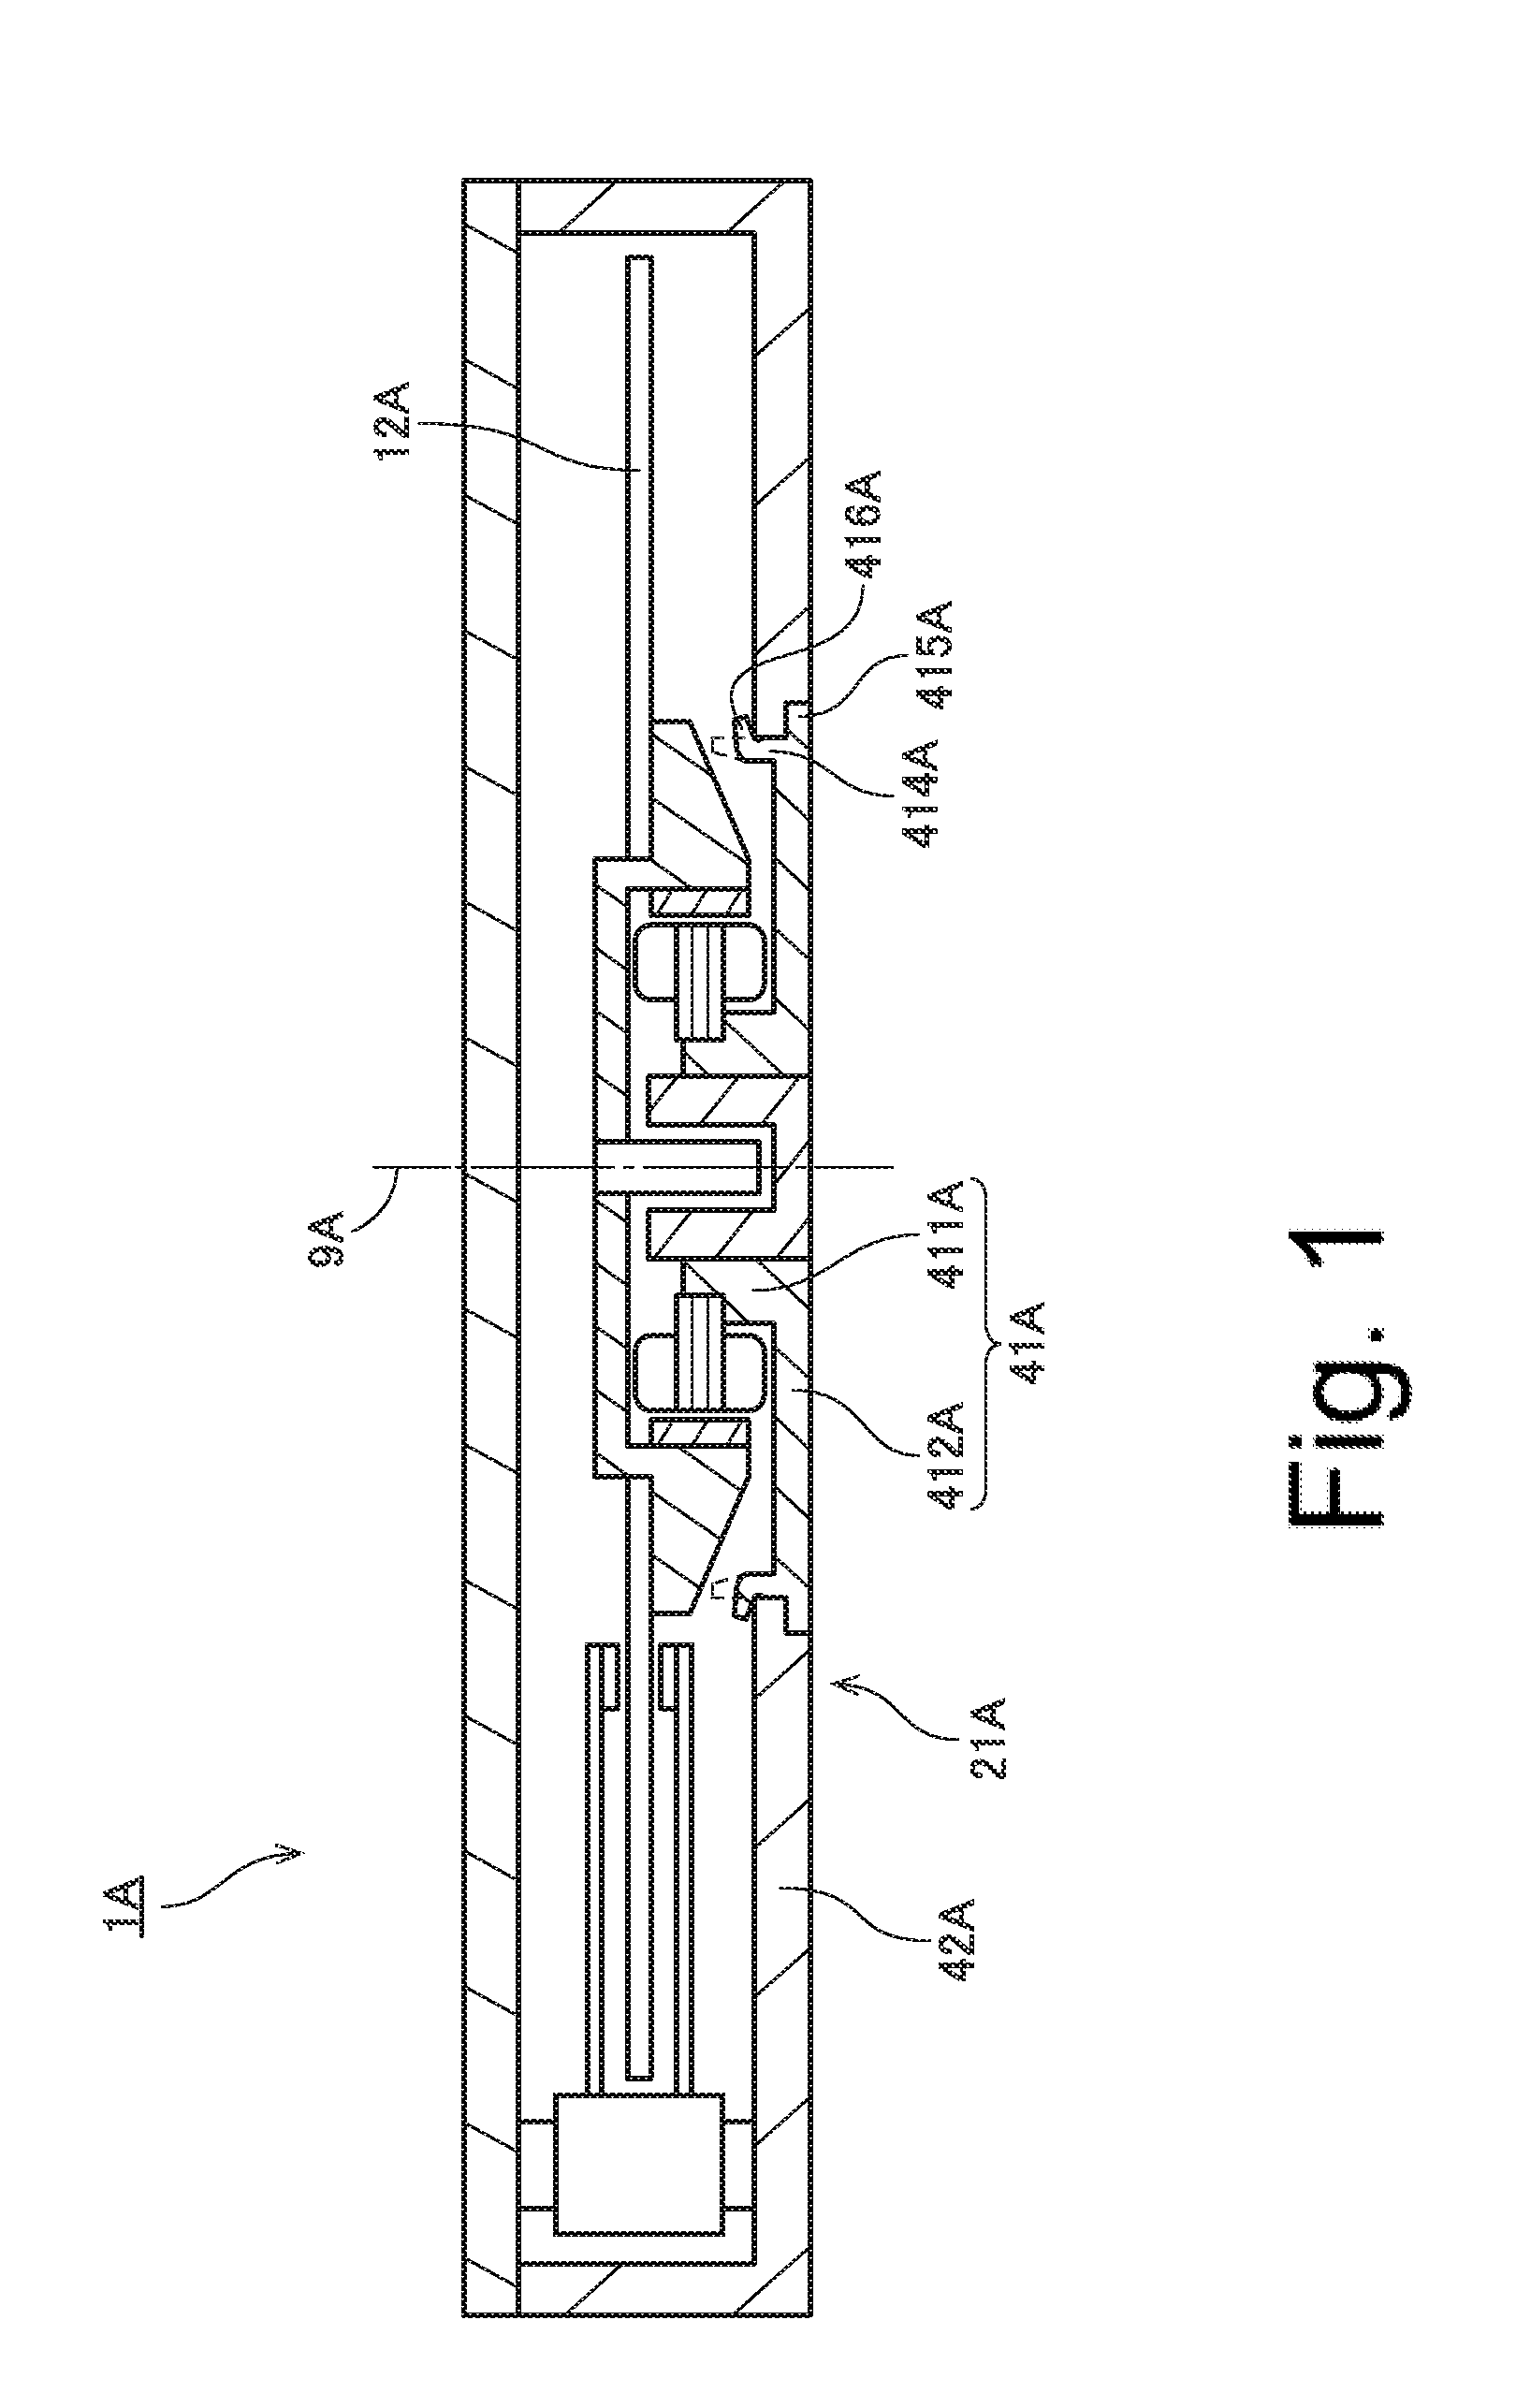 Base plate, base unit, motor and disk drive apparatus